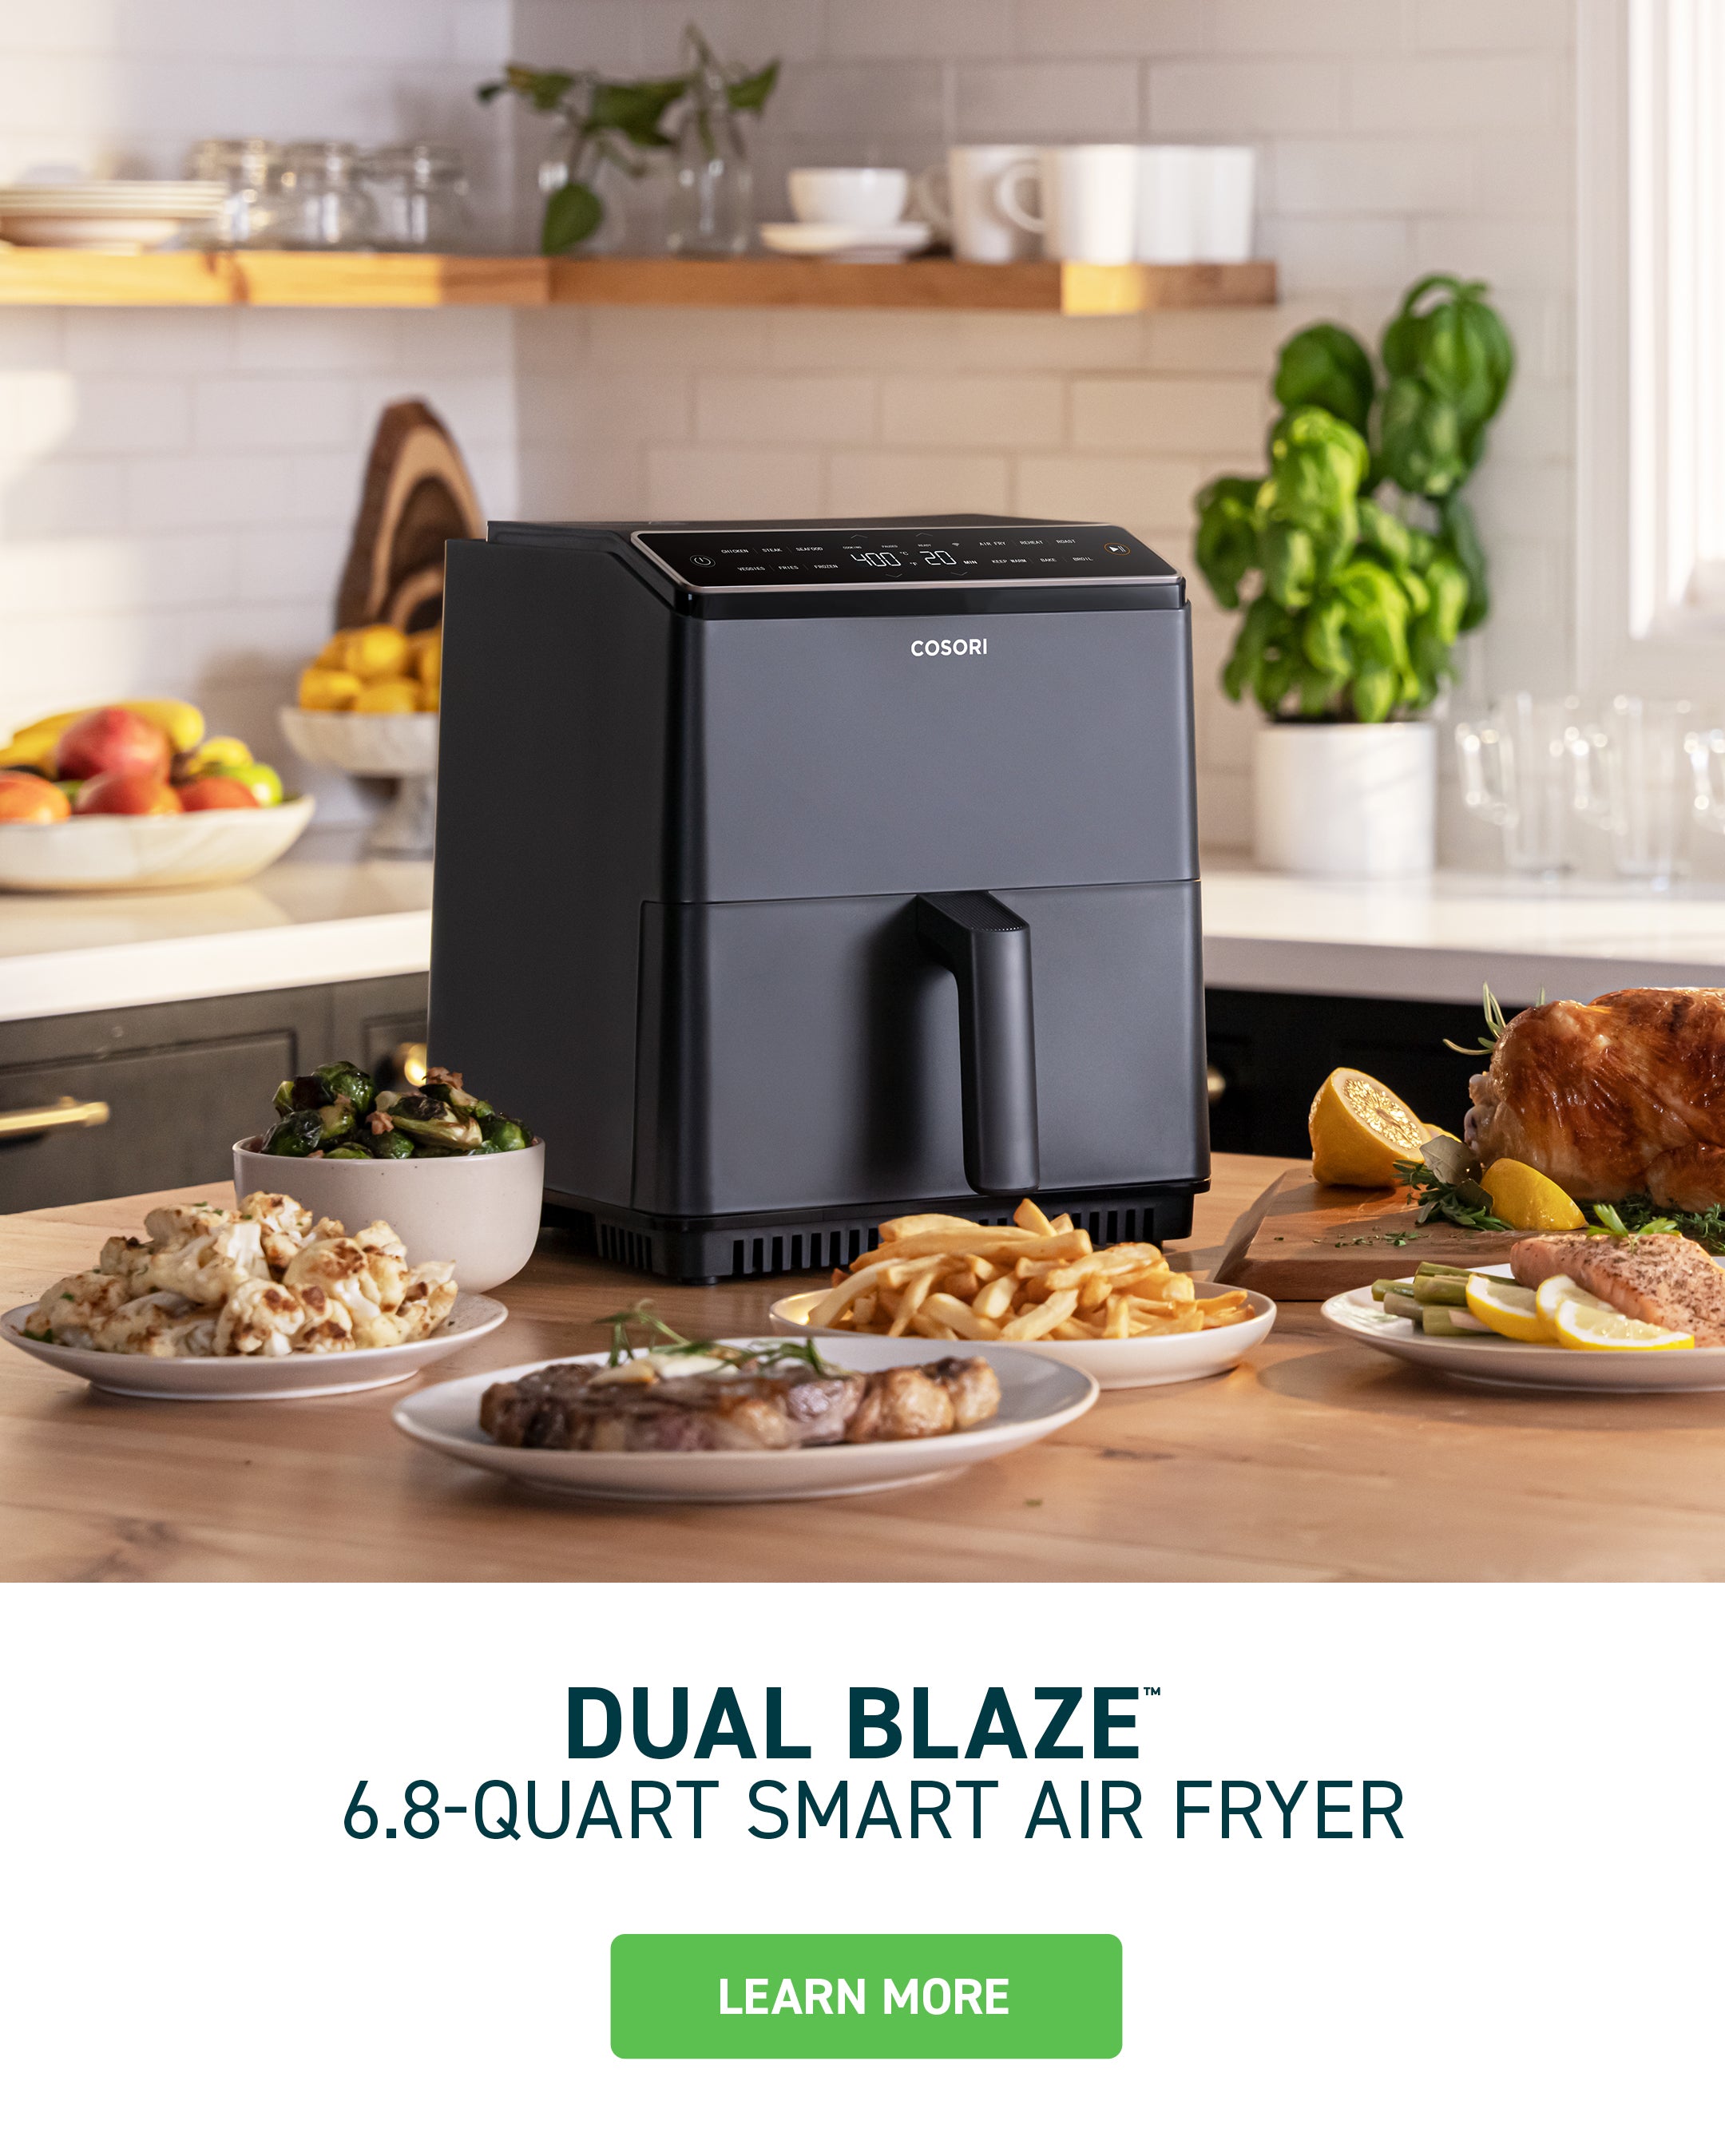 dual blaze air fryer with food dishes